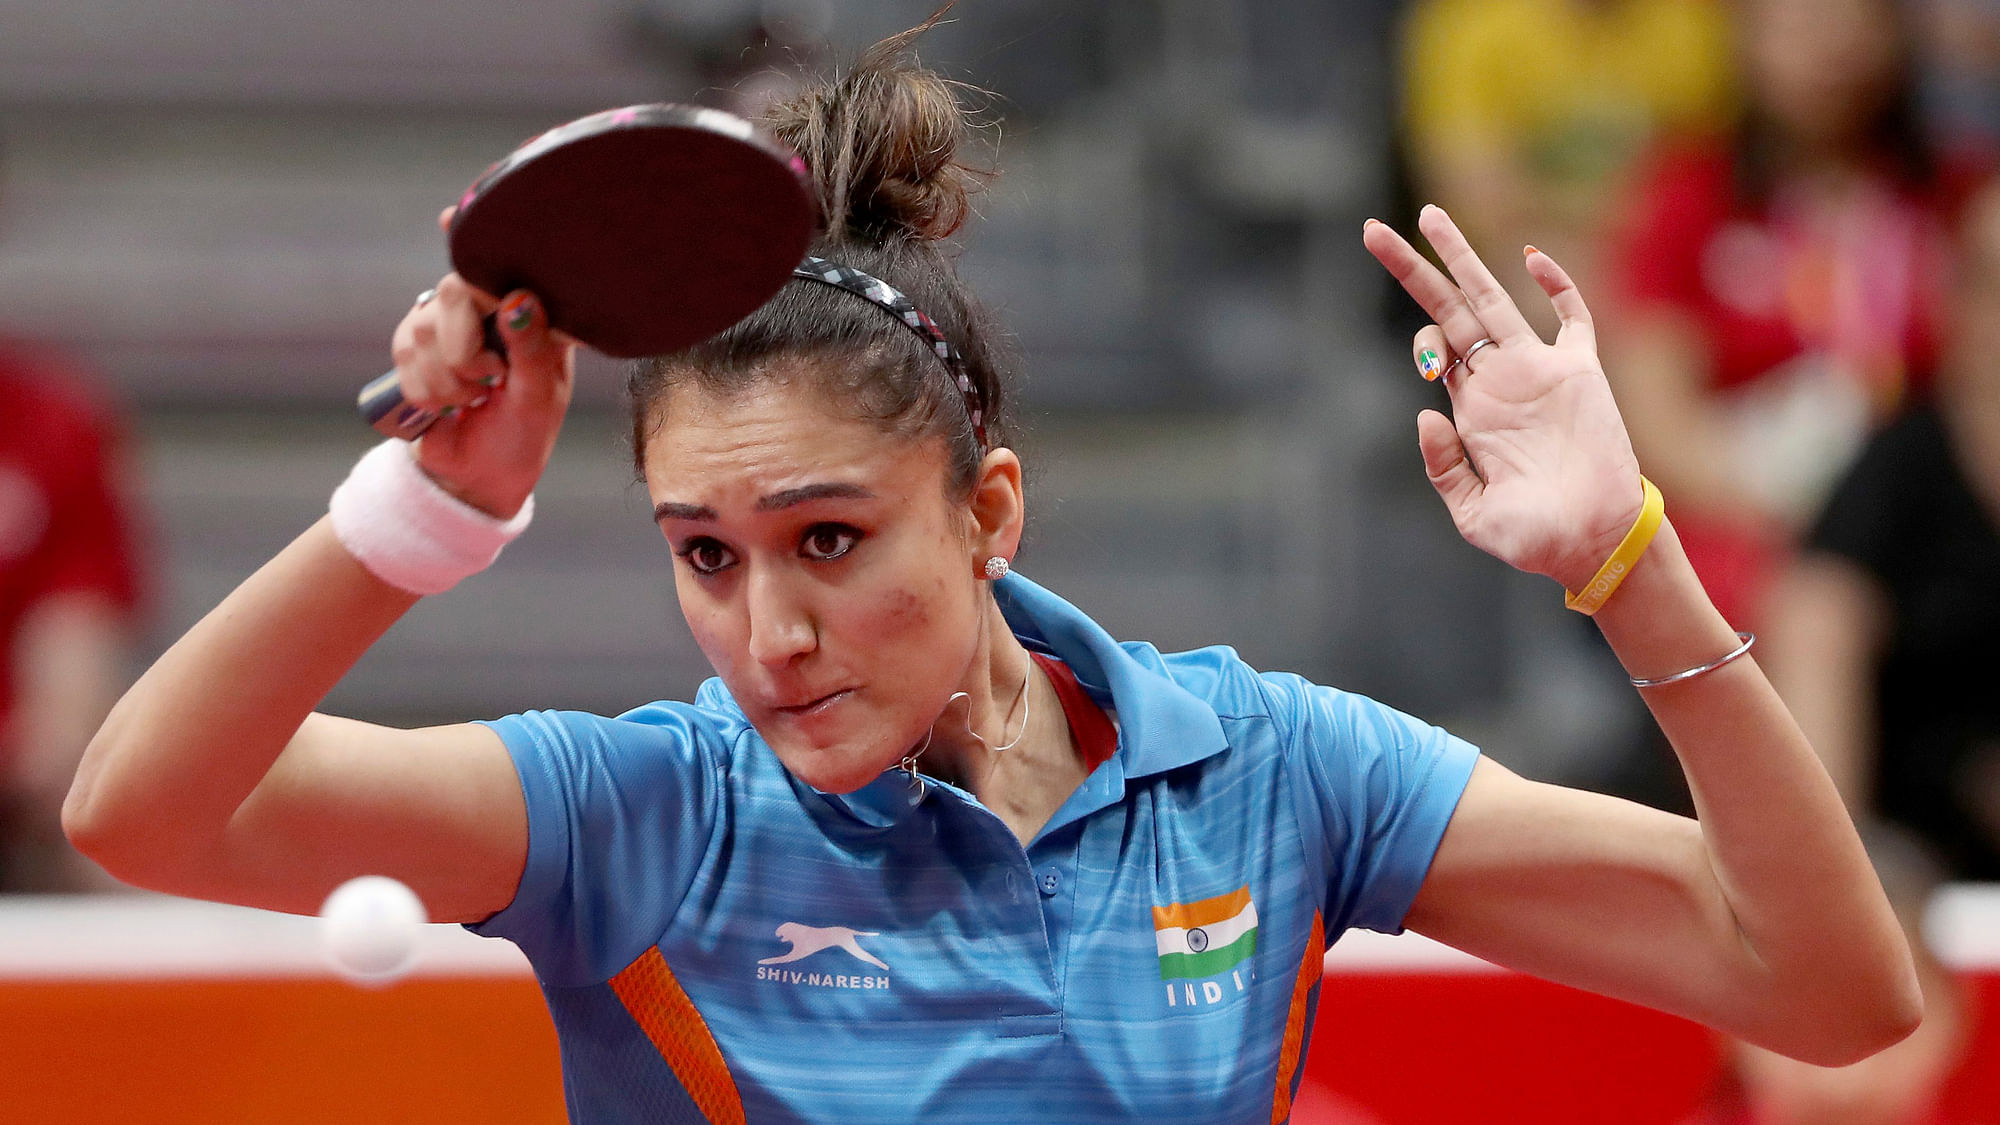  Manika Batra lost her women’s singles Round of 16 tie at the 2018 Asian Games in Jakarta on Friday.